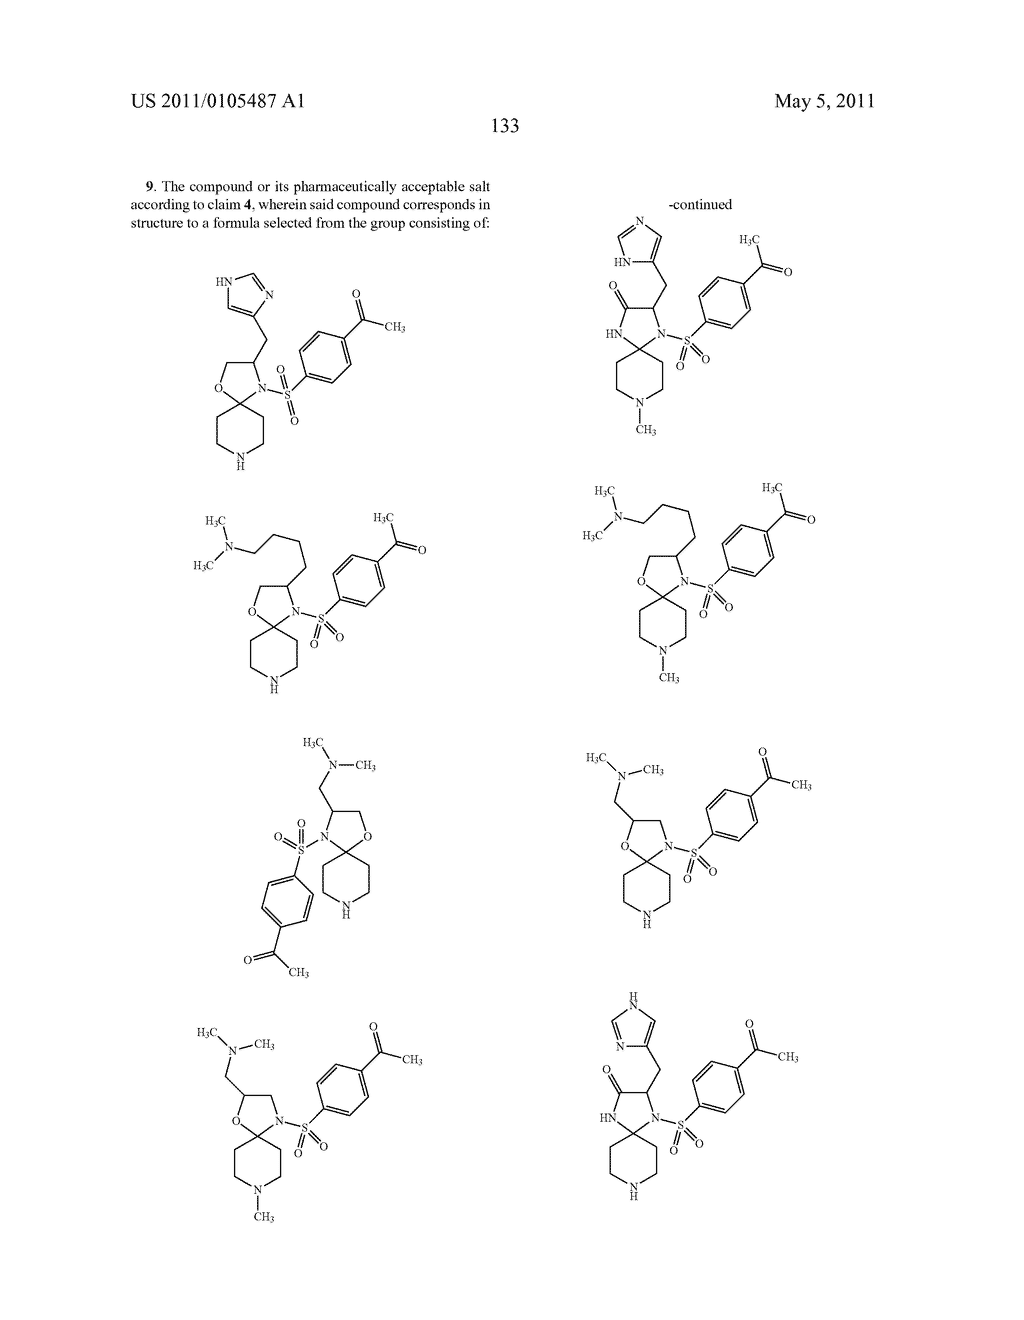 FILAMIN A BINDING ANTI-INFLAMMATORY AND ANALGESIC - diagram, schematic, and image 134